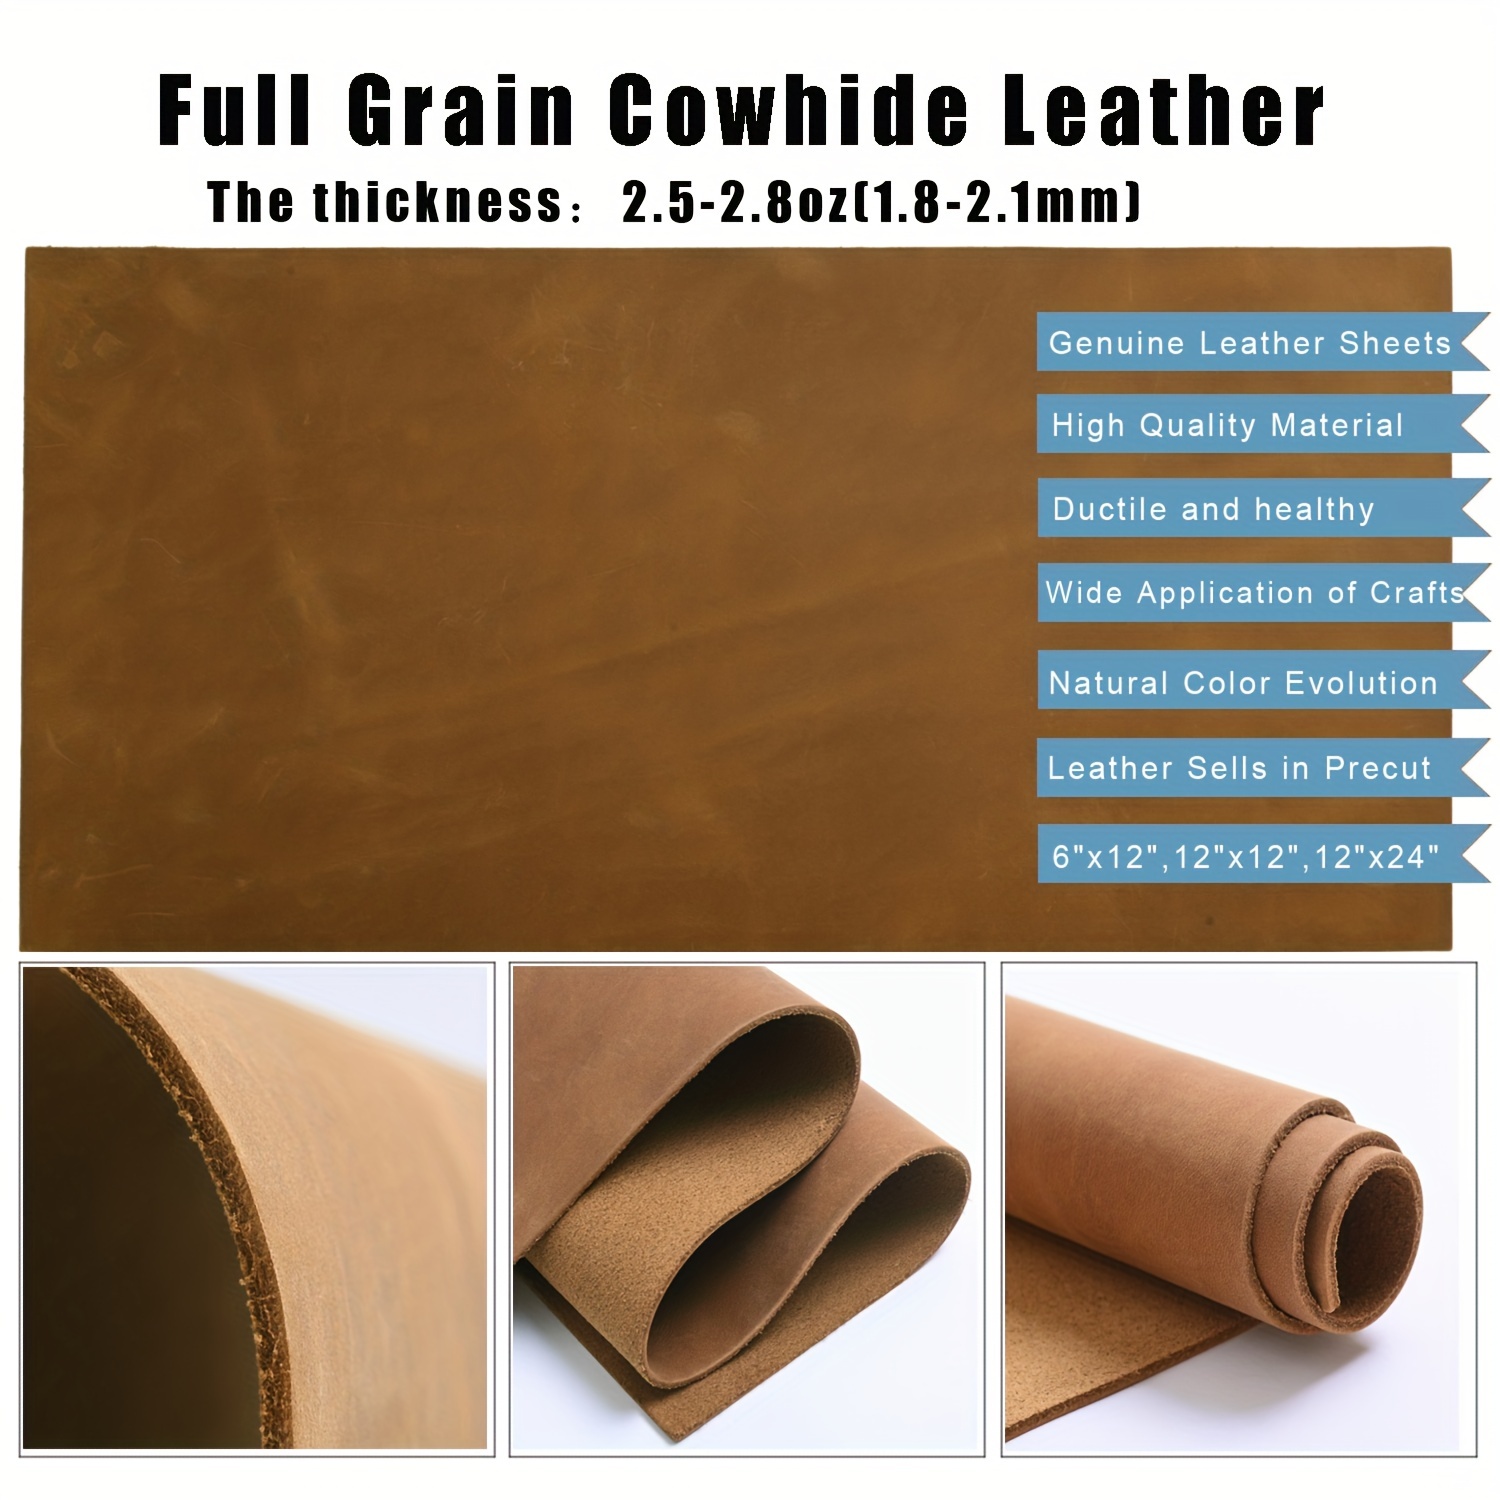 Full Grain Leather Pieces for Leather Working, 12x24 Tooling Leather  Sheets for Crafts Genuine Leather Material 1.8-2.1 mm Thick Leather Hide  for